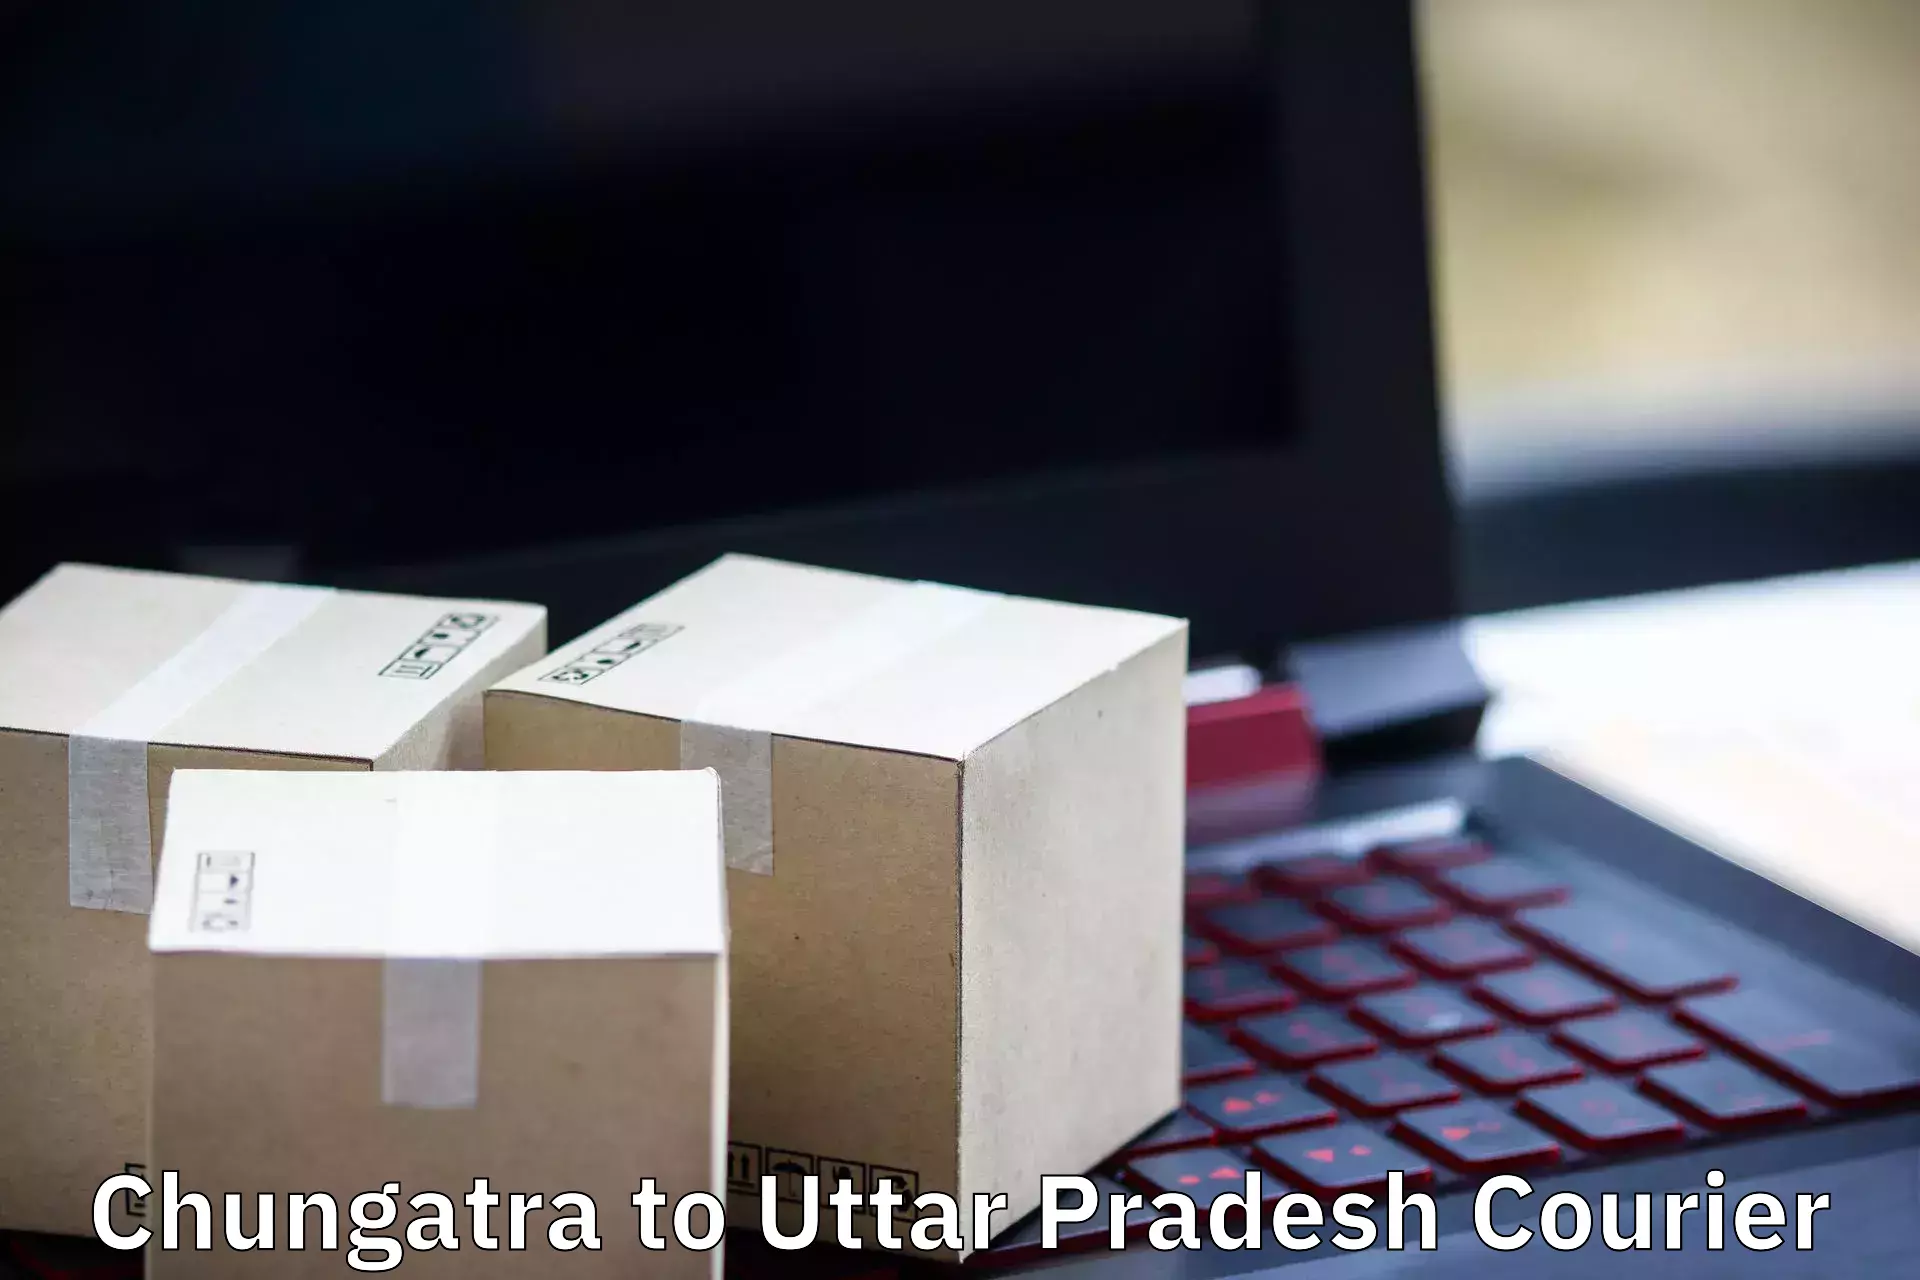 Furniture moving specialists Chungatra to Lucknow